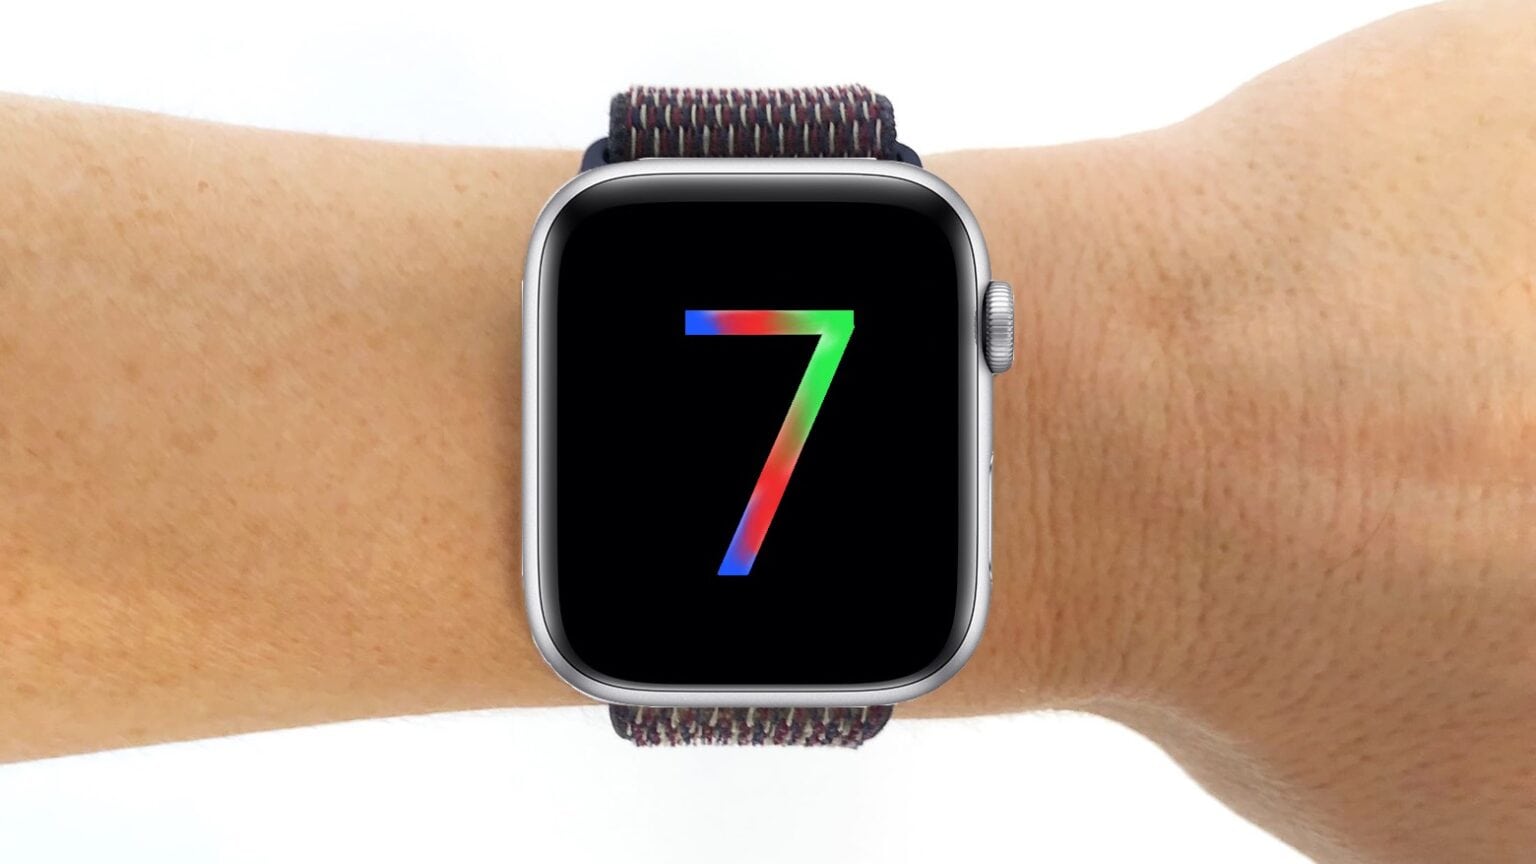 This is not an Apple Watch Series 7.